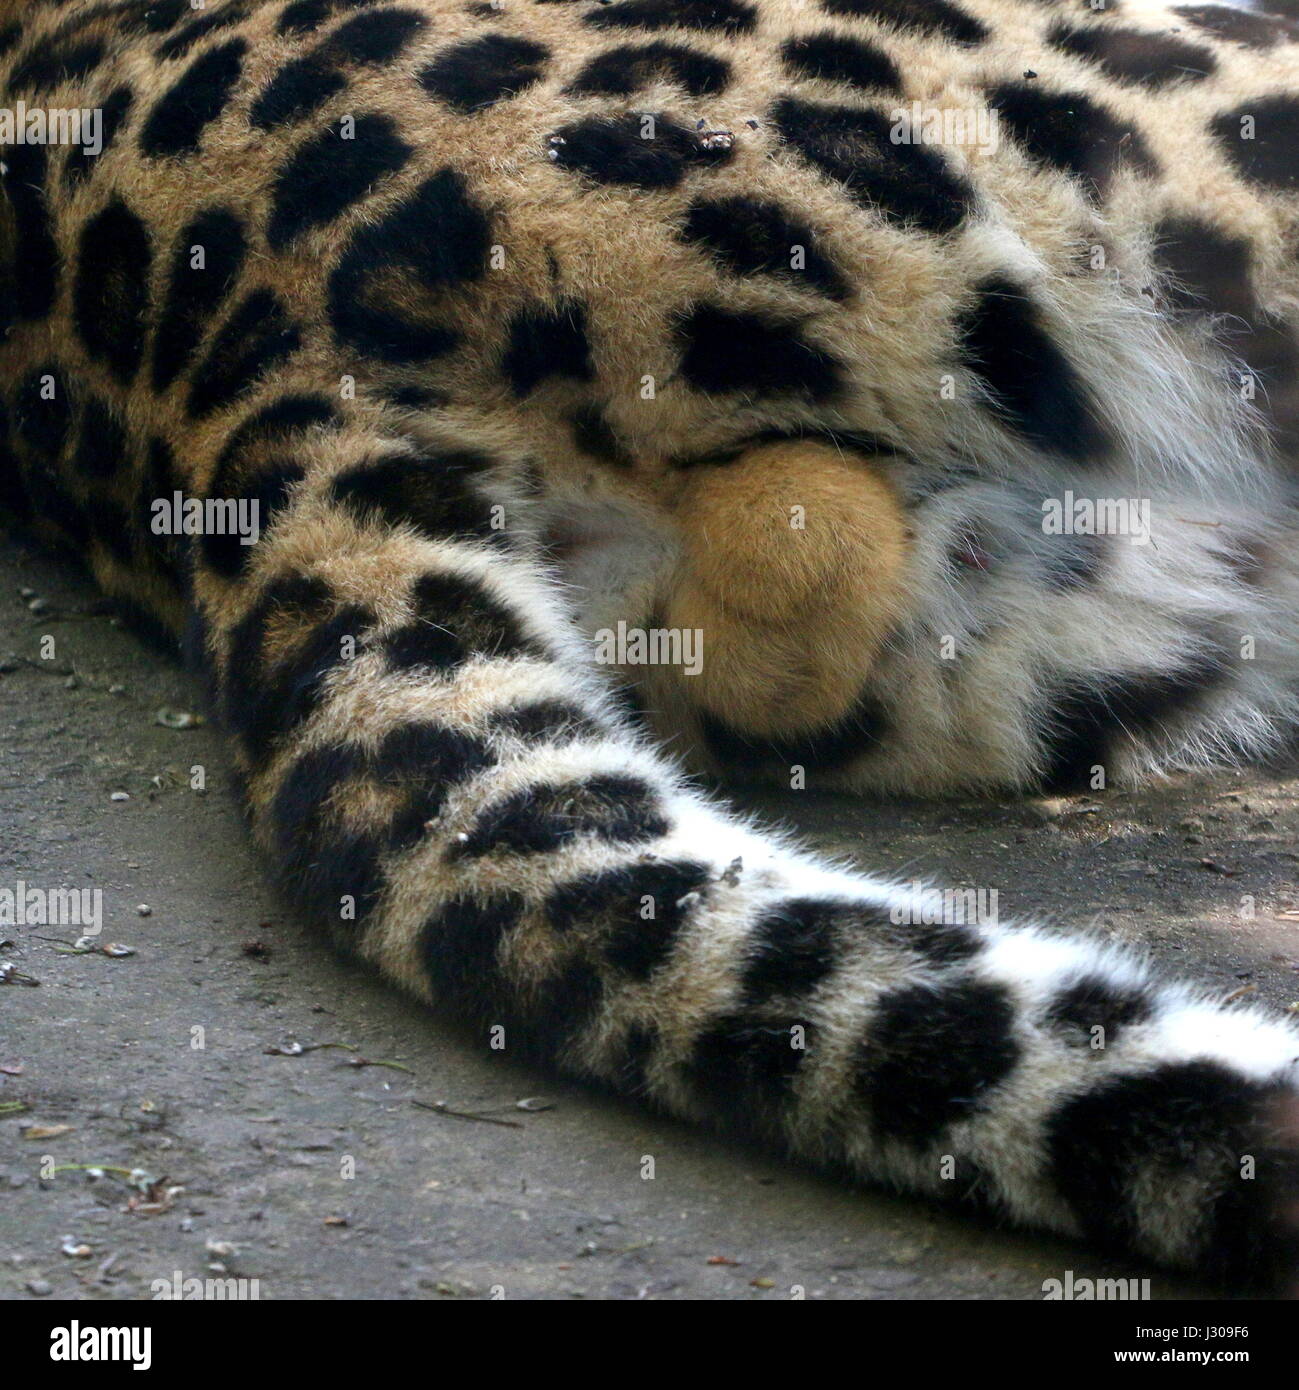 Closeup of the testicles of a male Amur or Far Eastern Leopard (Panthera pardus orientalis. (Critically endangered species) Stock Photo